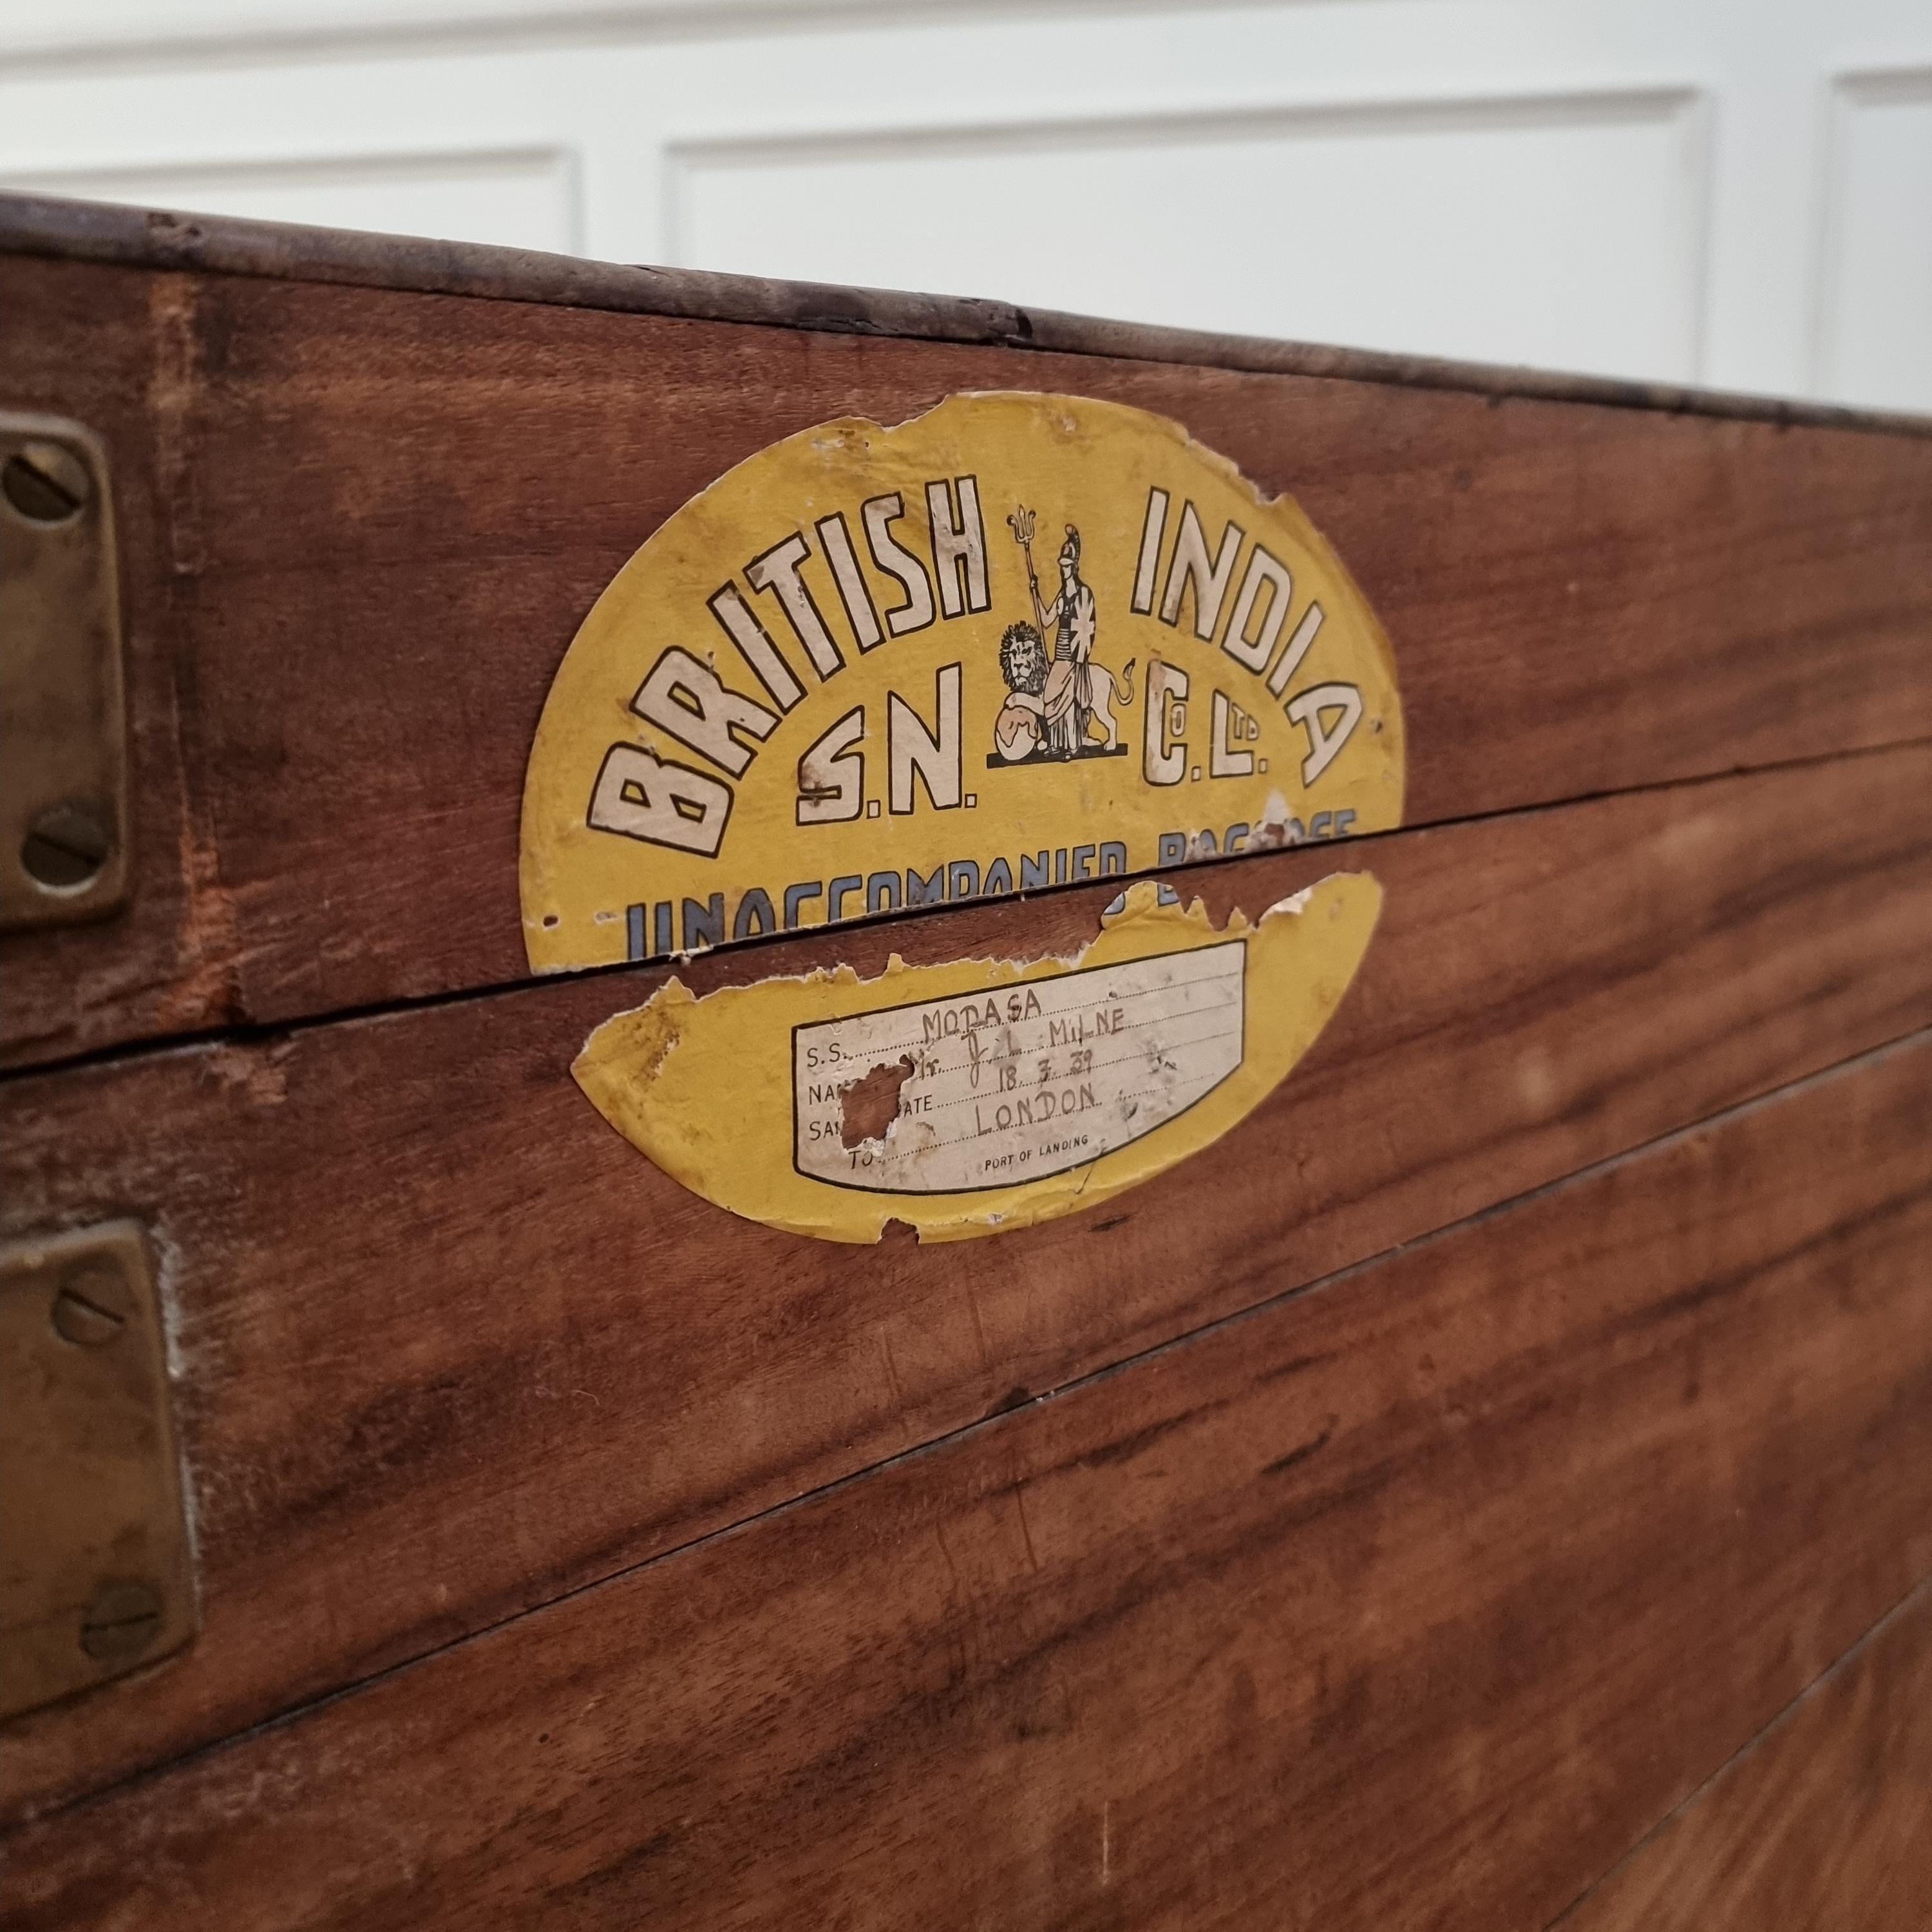 Antique Camphor Travel Chest In Good Condition For Sale In Leamington Spa, Warwickshire